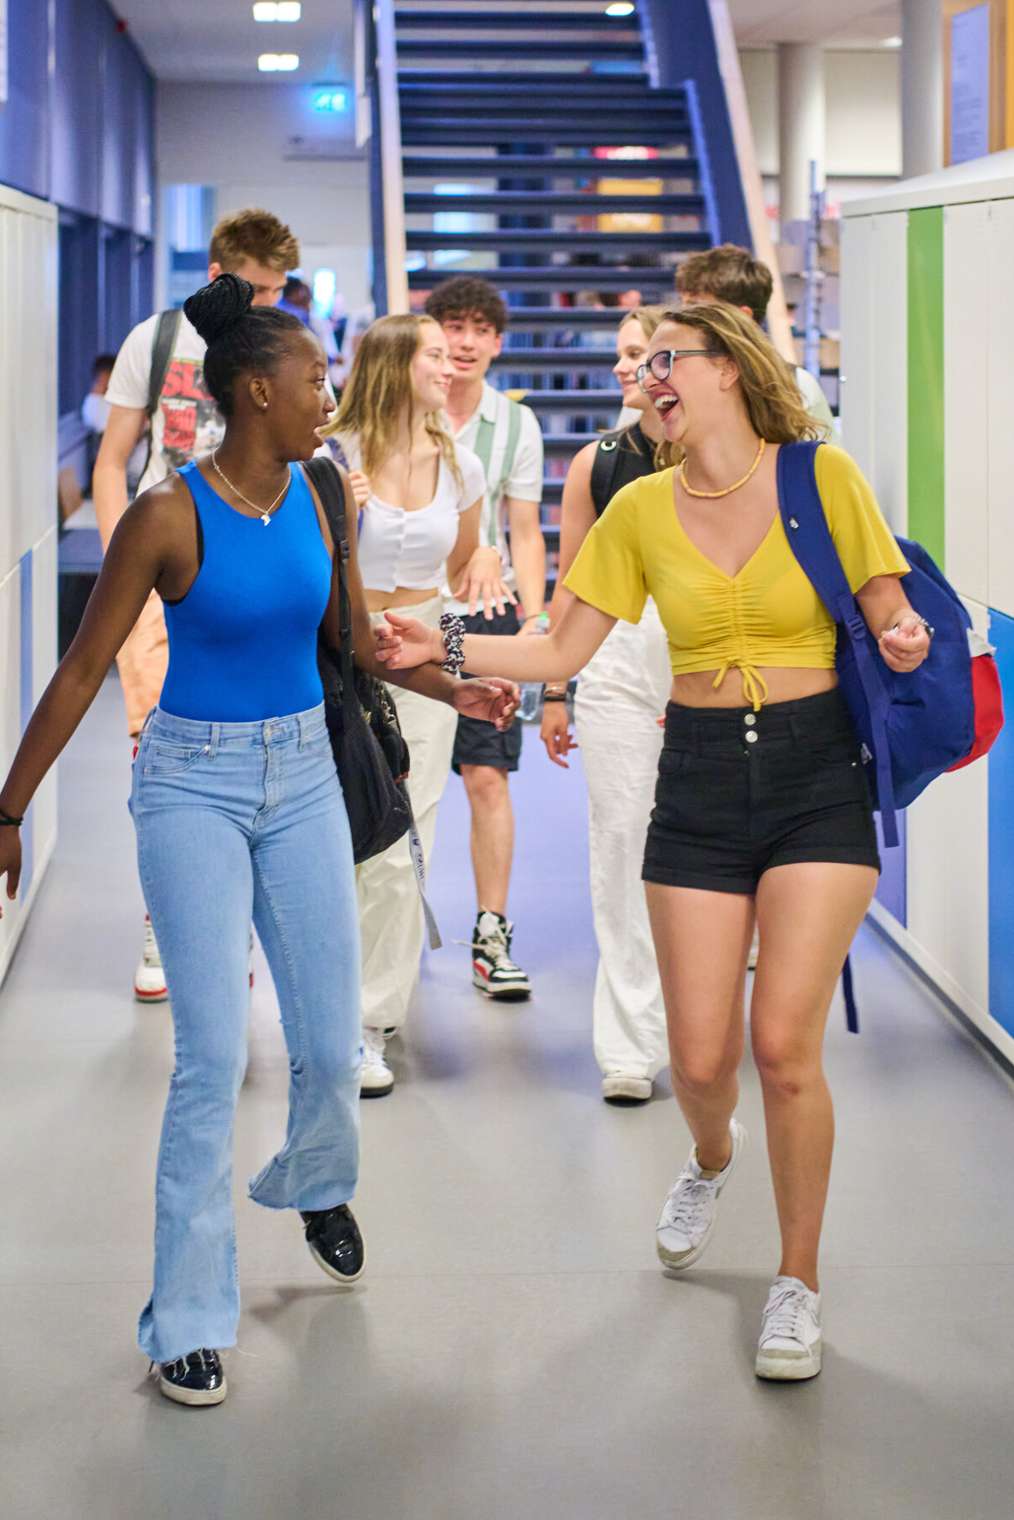 Students walking in Dr. Meurer building AUAS